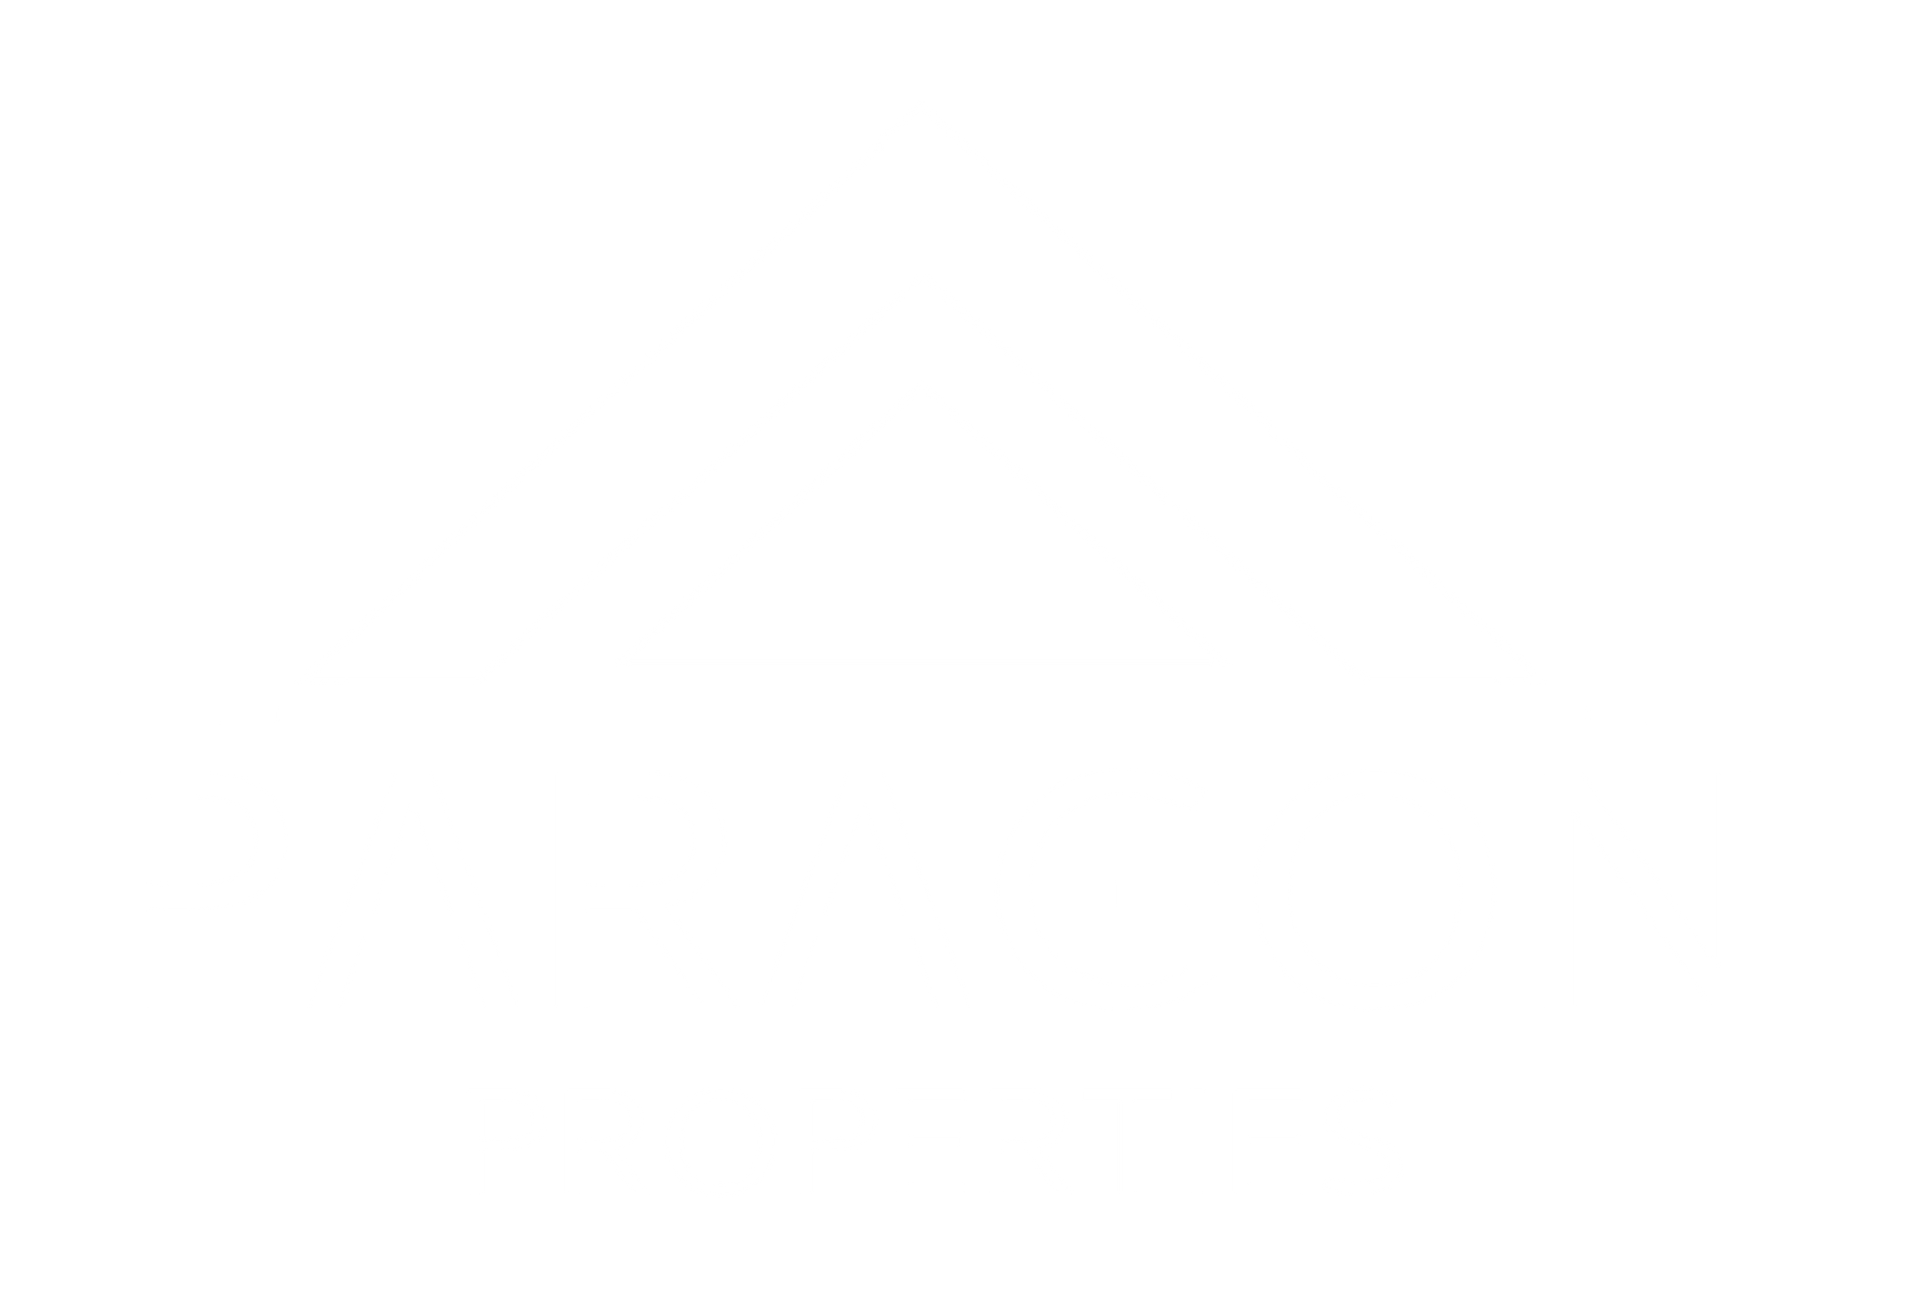 Paragon Properties Logo - footer, go to homepage